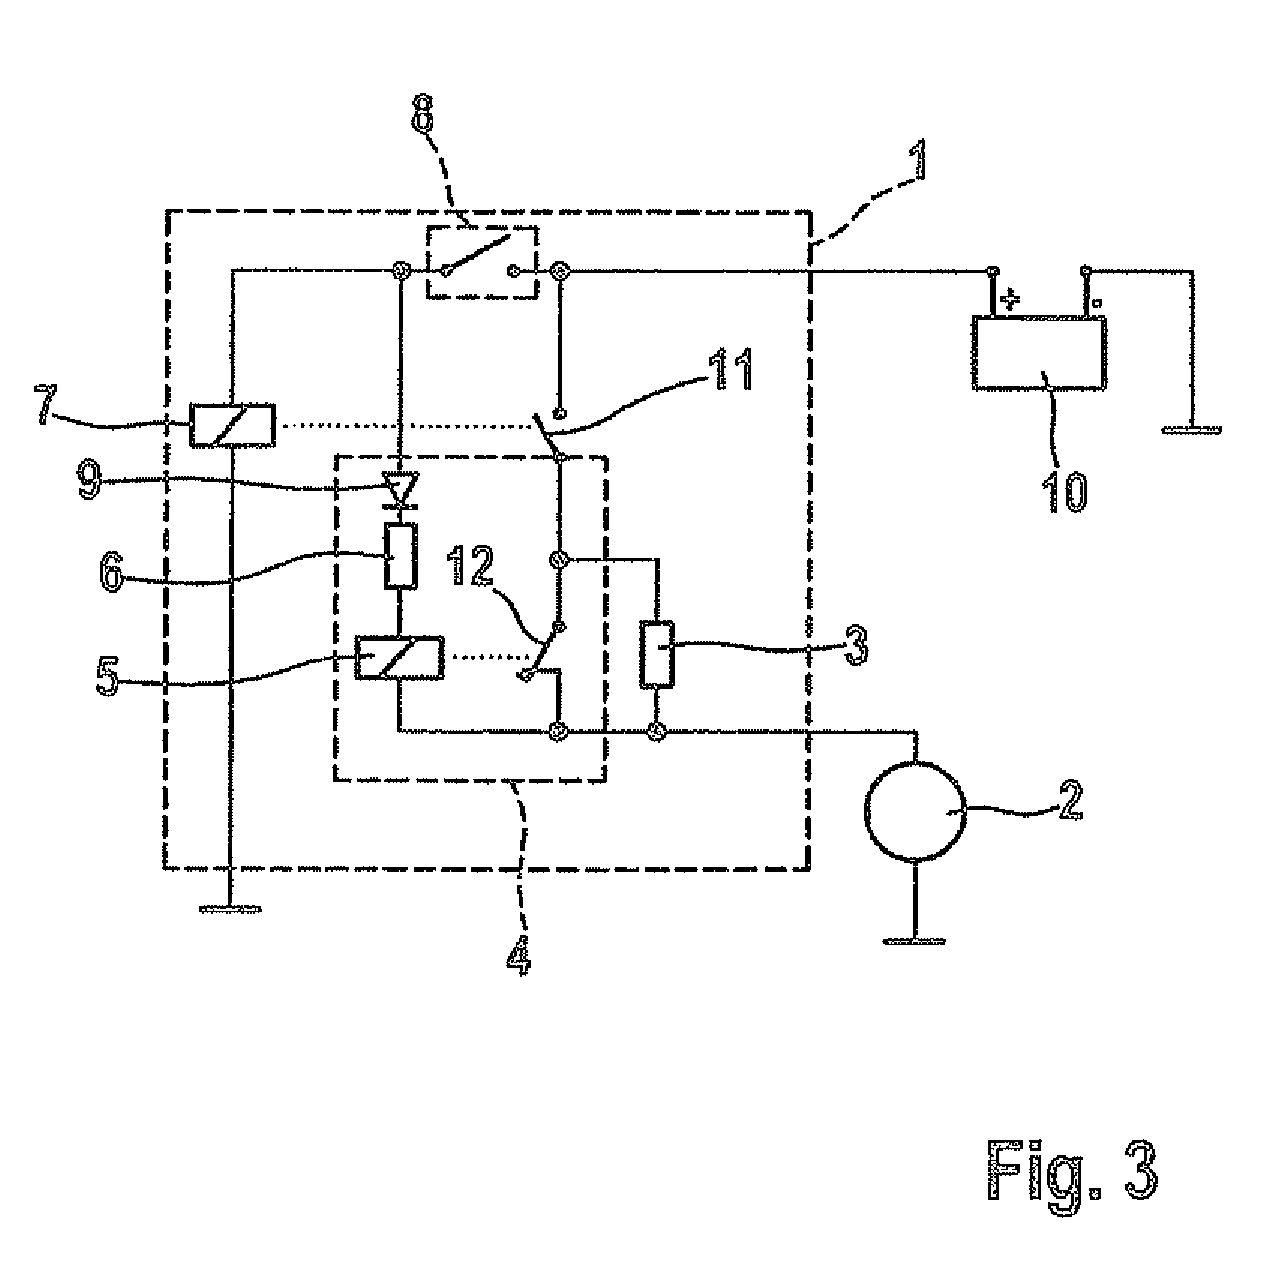 Circuit configuration for a starting device